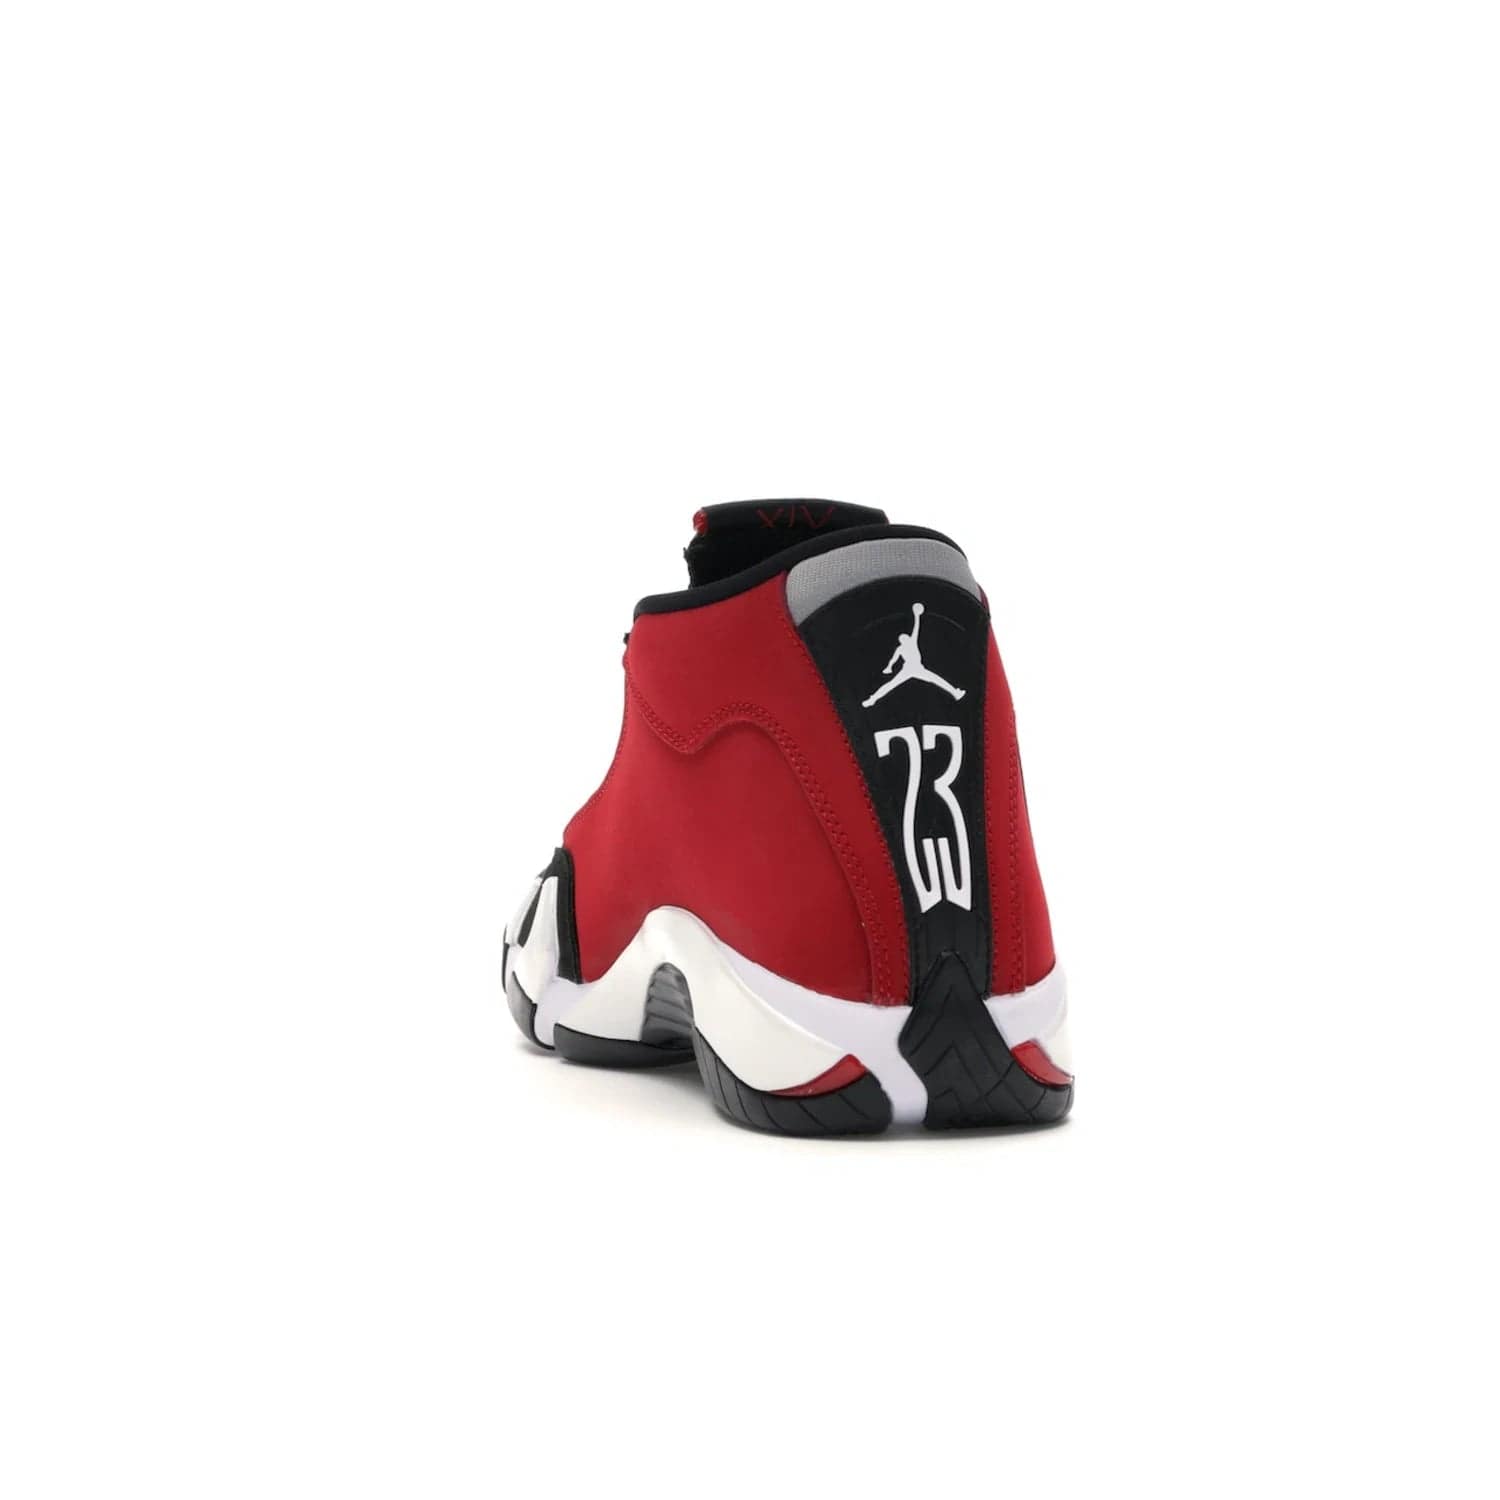 Jordan 14 Retro Gym Red Toro - Image 26 - Only at www.BallersClubKickz.com - Feel the Chicago Bulls energy with the Jordan 14 Retro Gym Red Toro! Black, red, and white design unites performance and fashion. Get your hands on this limited edition Jordan and show off your style today.